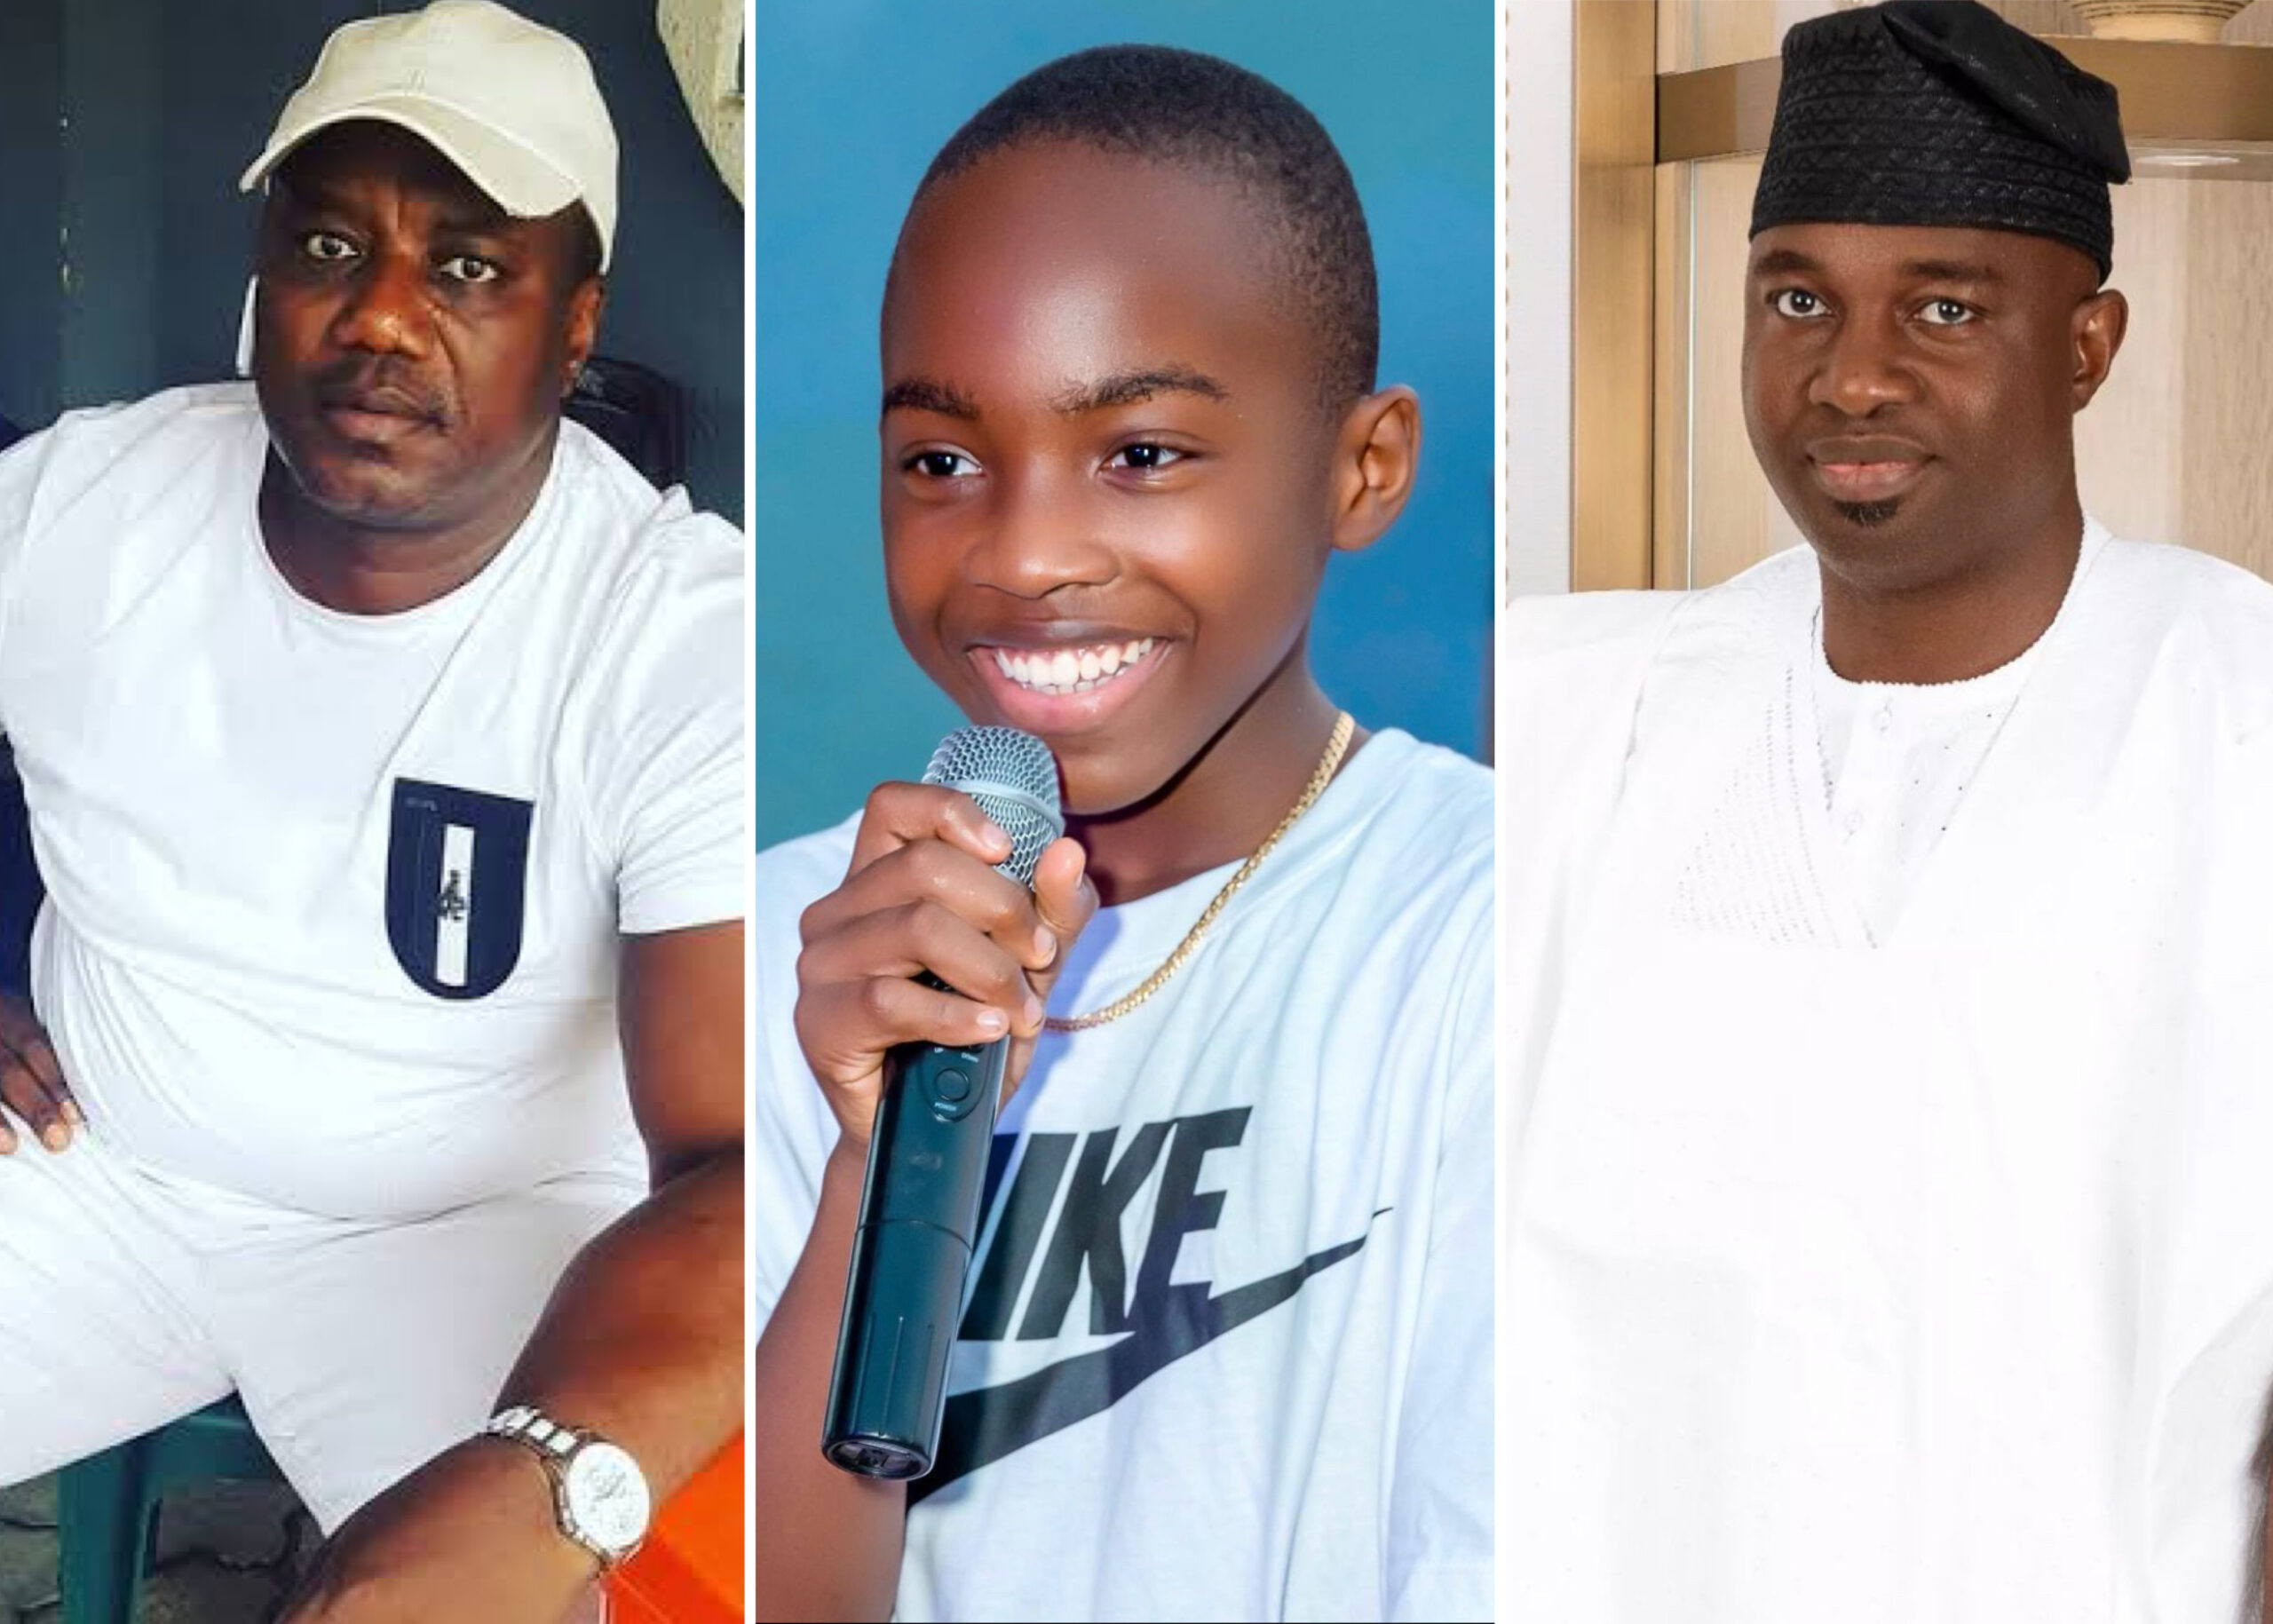 ‘Juwon Is My Son’ — Mercy Aigbe’s Ex-Husband Says Amid Claims Of Paternity Fraud